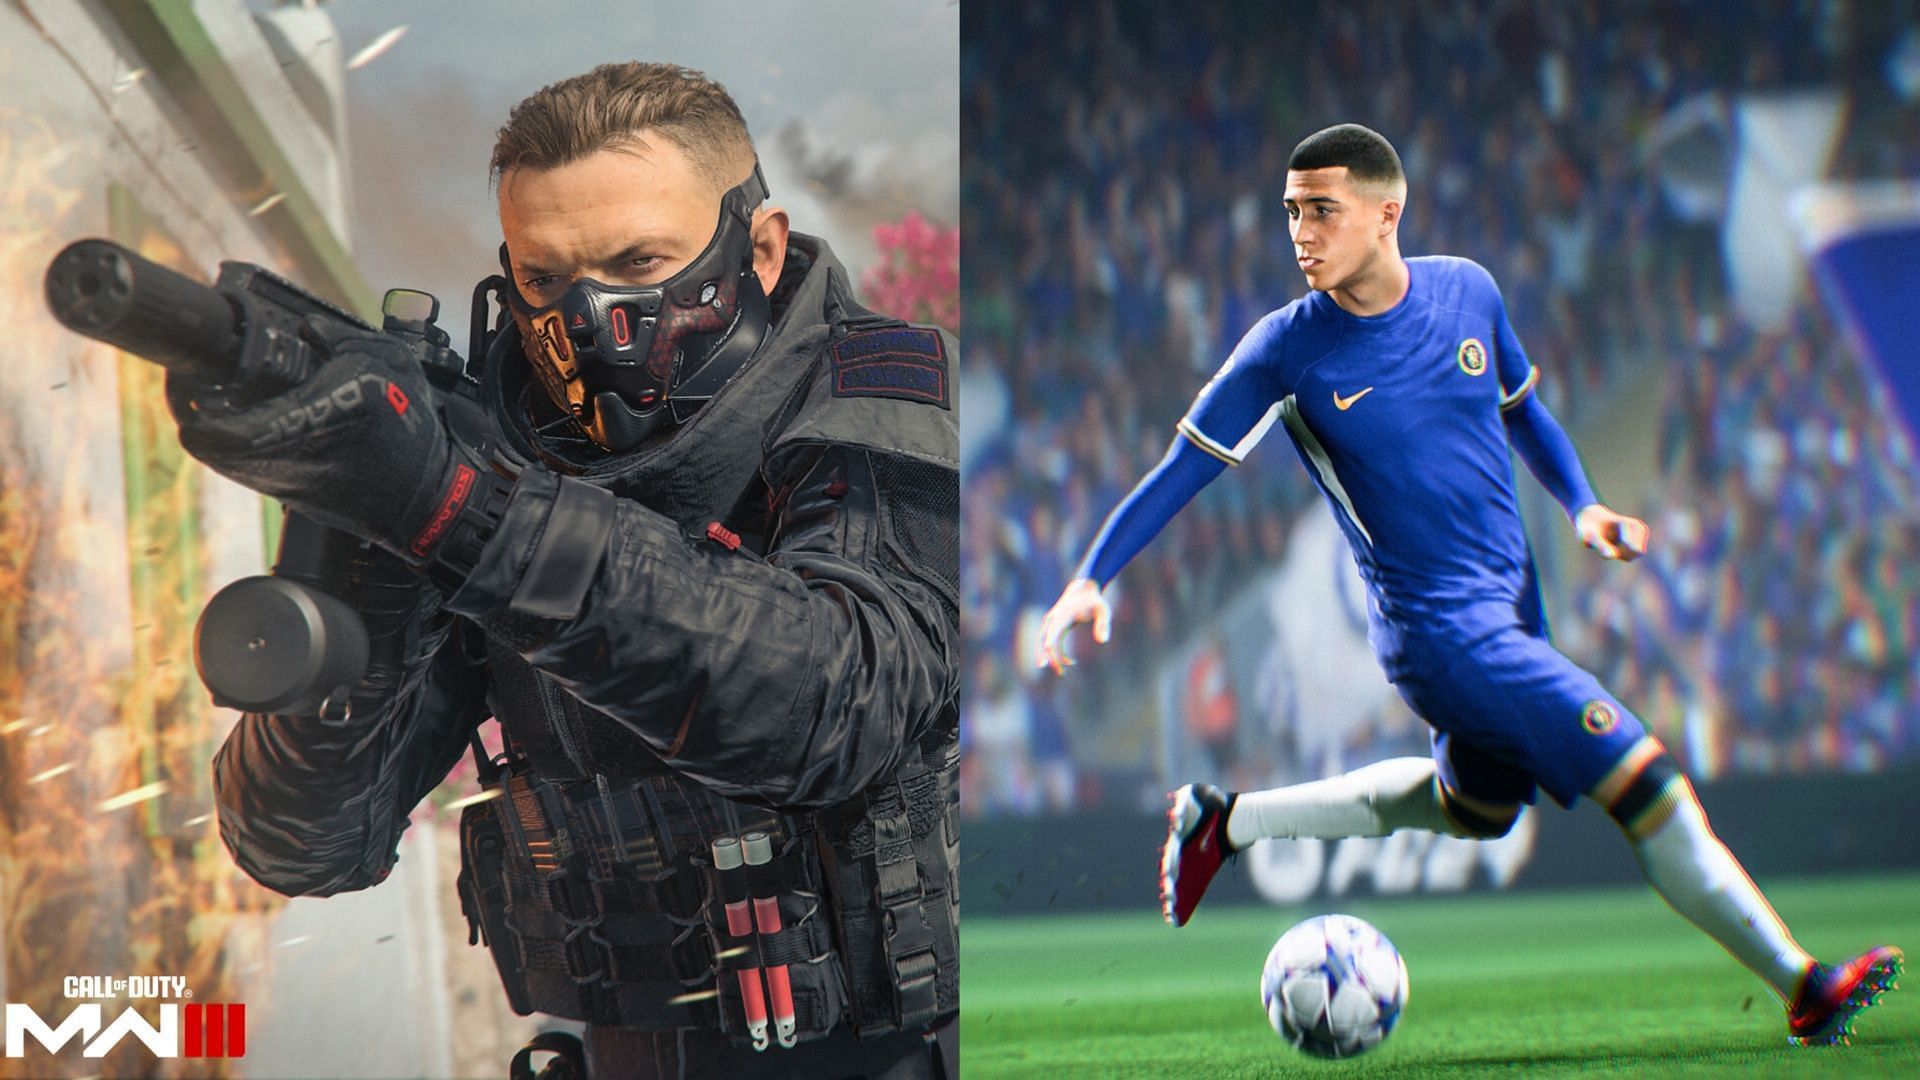 The modern video game industry has certain negative elements around them (Images via Activision, EA Sports)